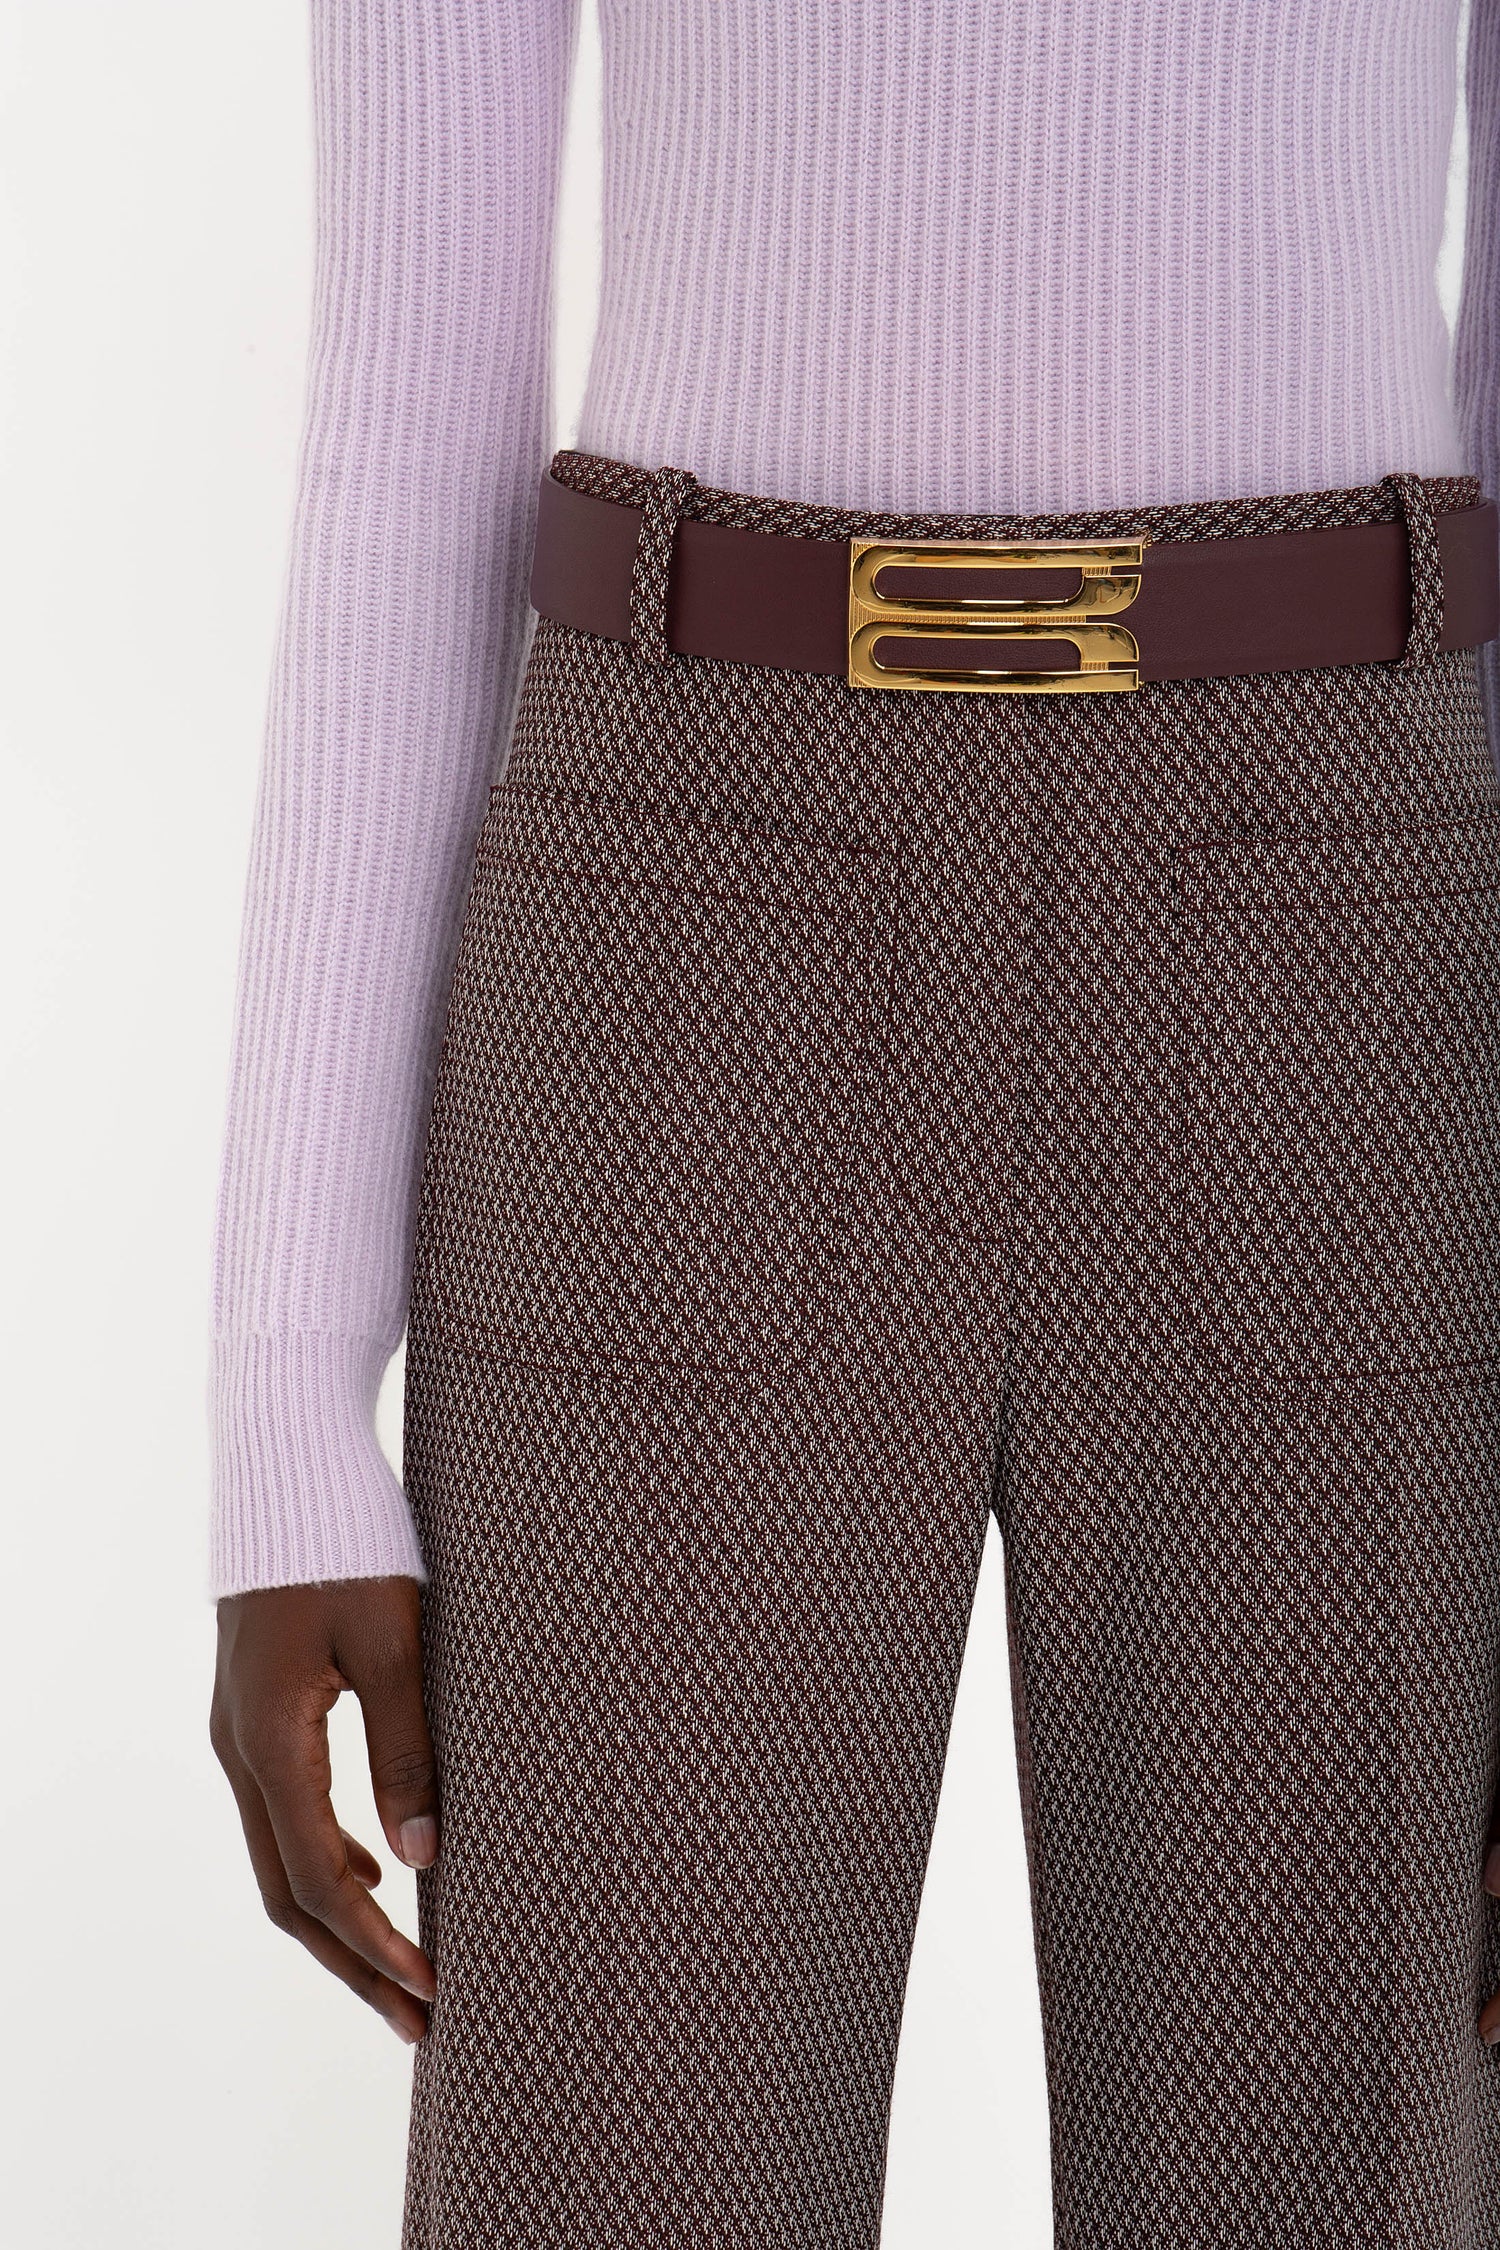 Person in a Victoria Beckham Double Collared Jumper In Petunia and patterned pants with a burgundy belt featuring a gold buckle.